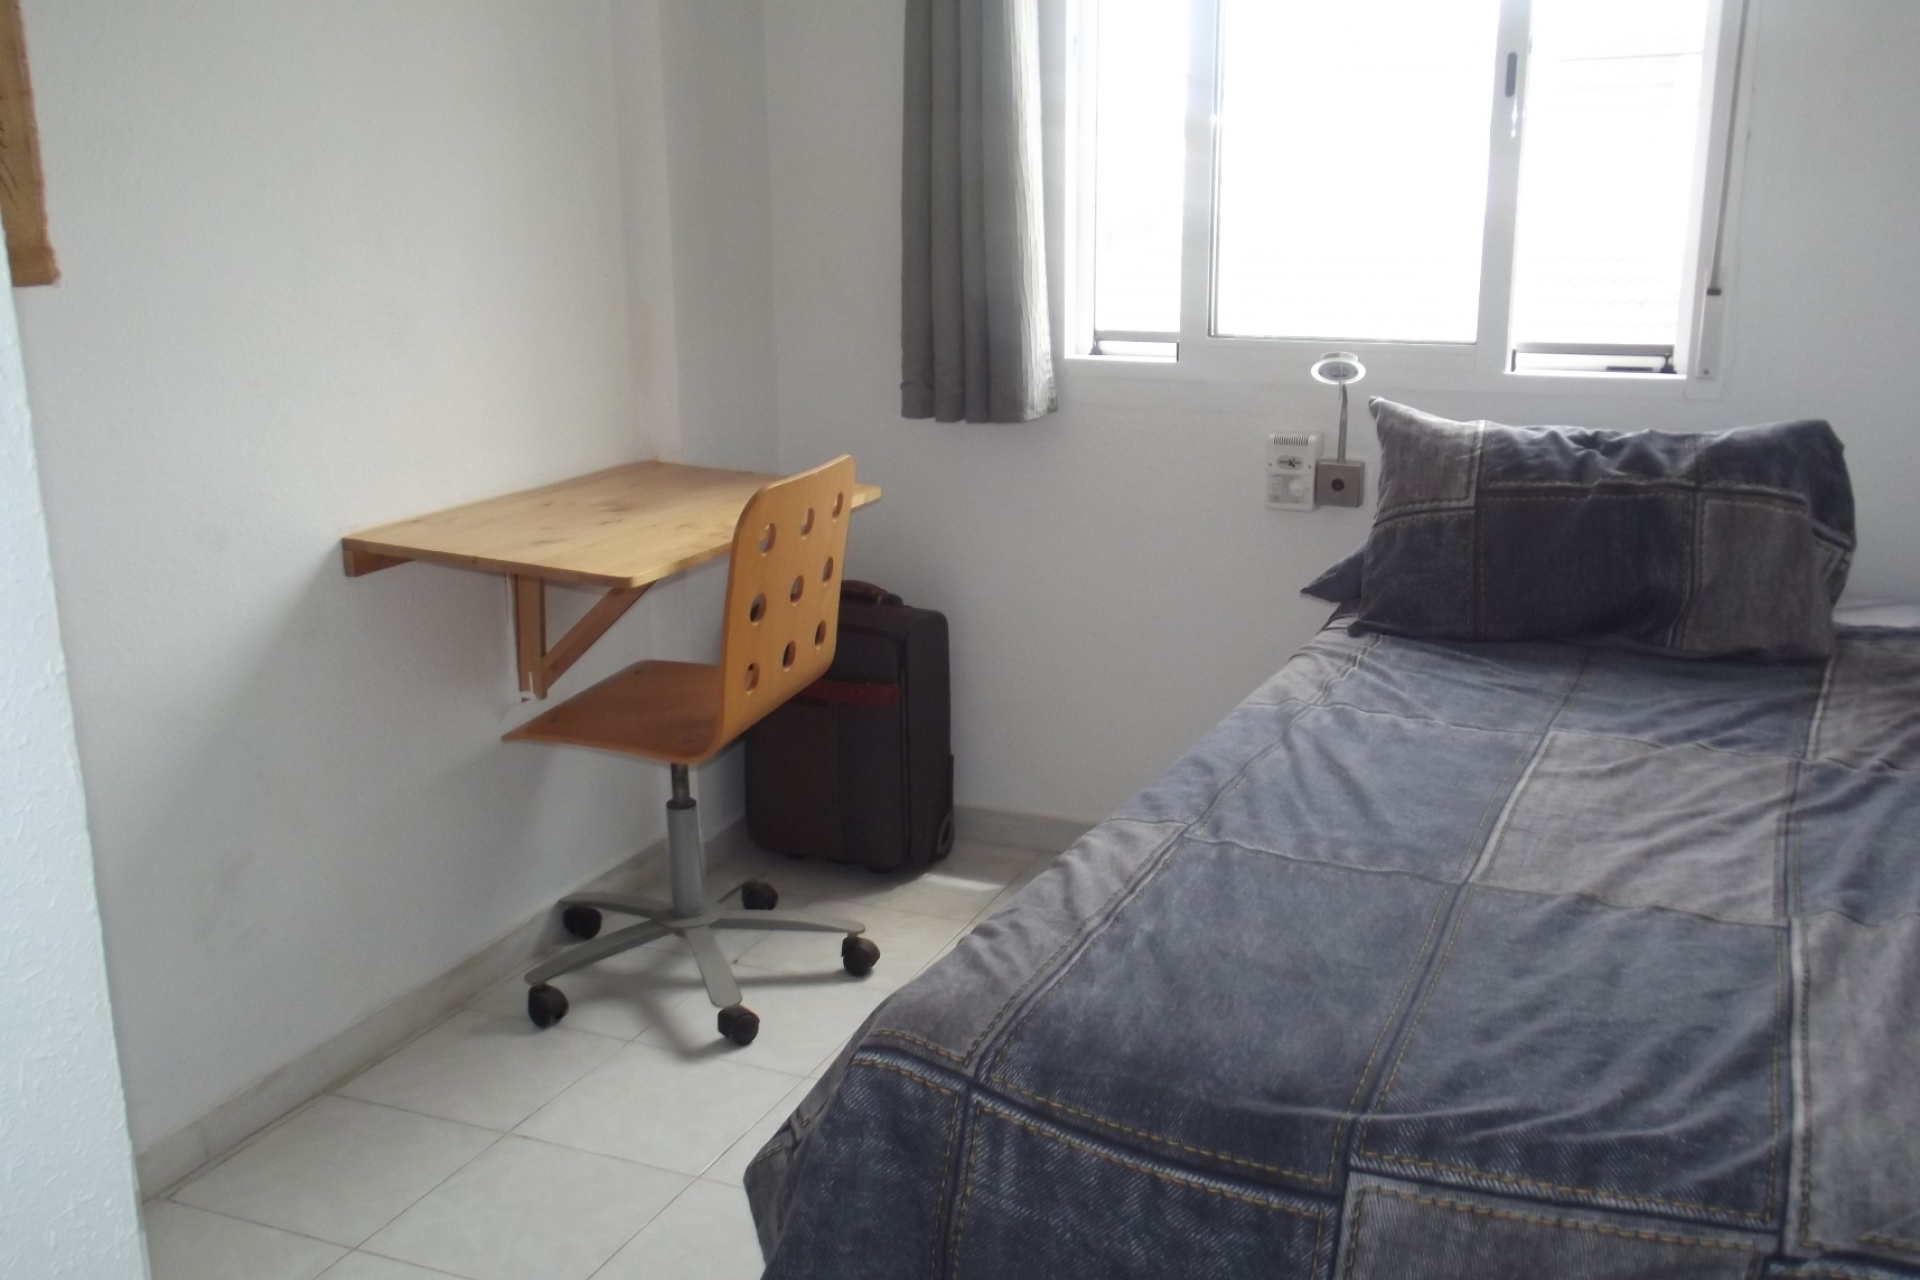 Archived - Townhouse for sale - Torrevieja - La Siesta